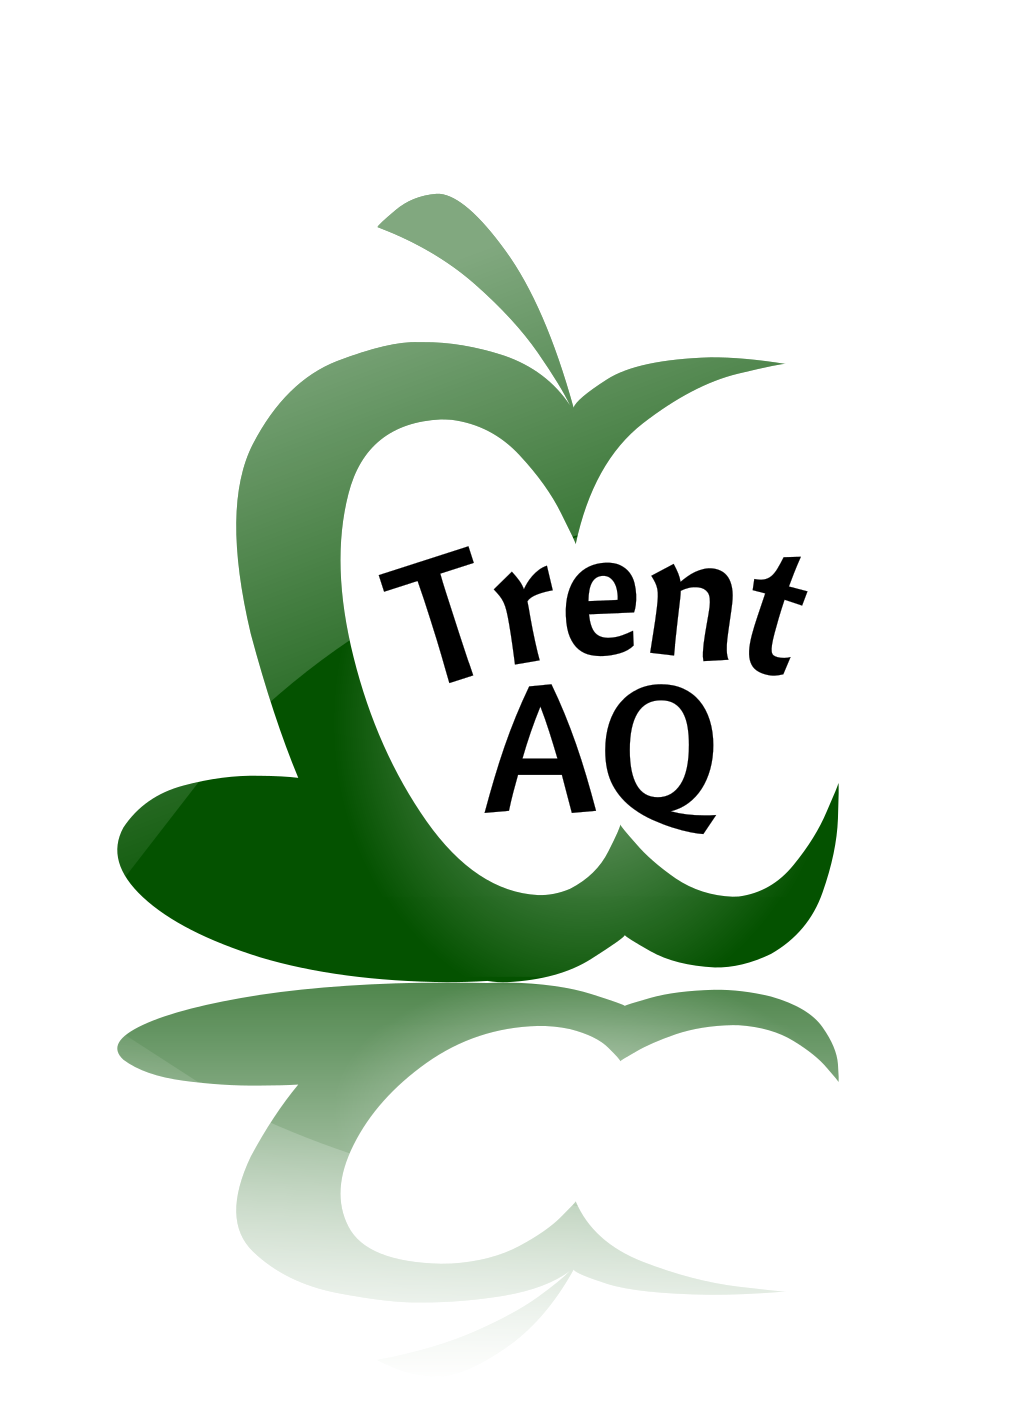 "Green apple with Trent AQ in the middle"